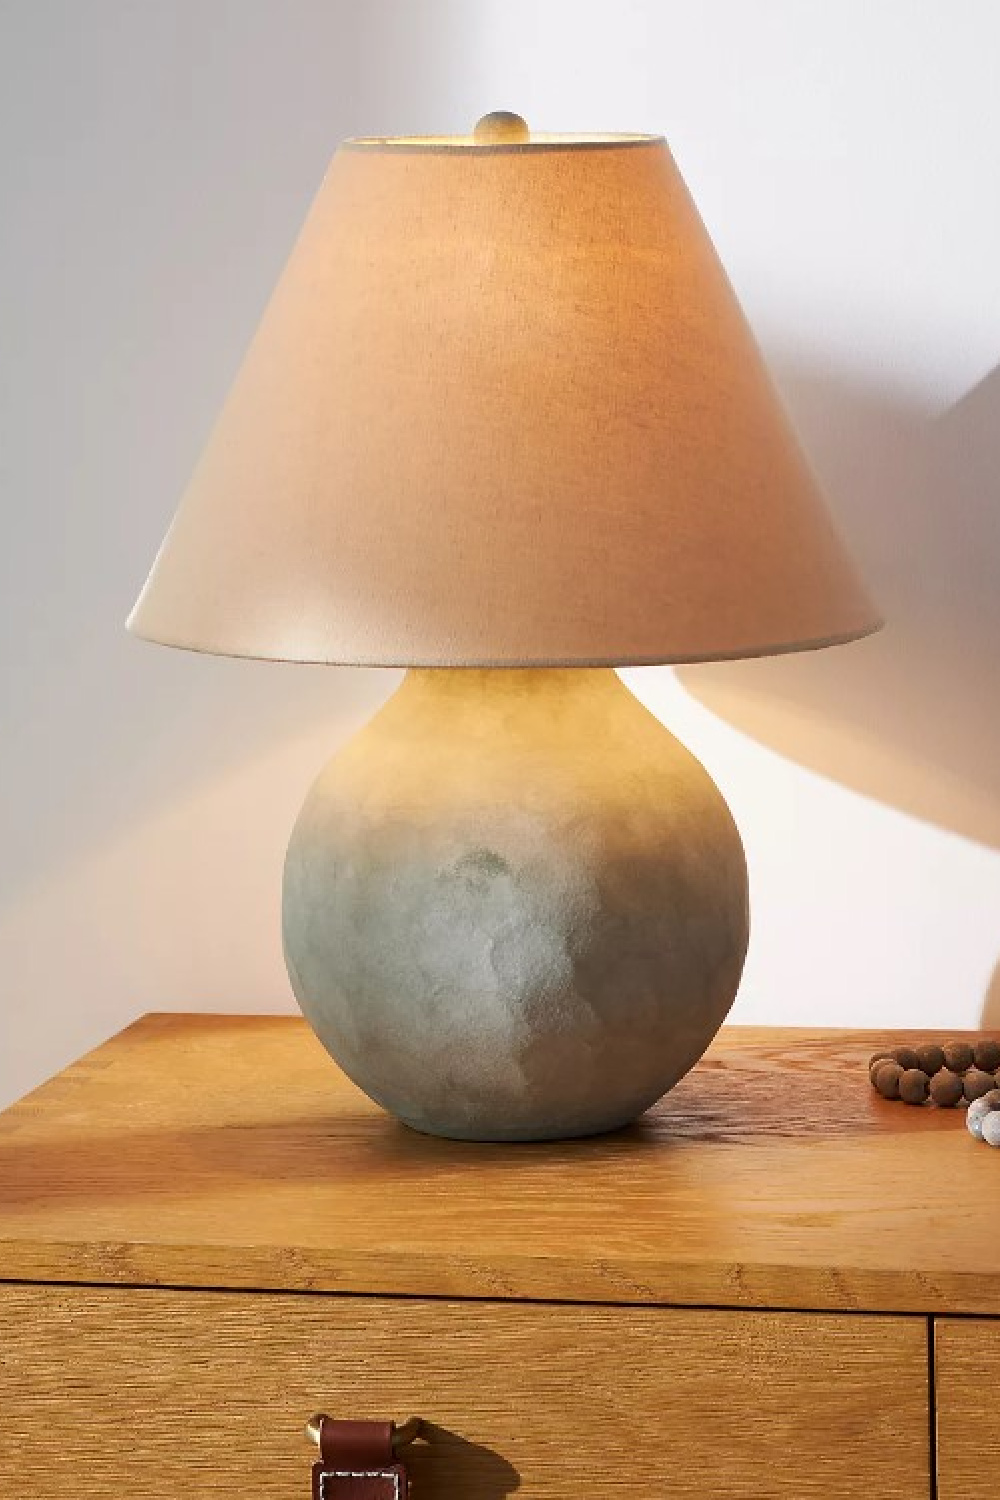 Roslyn table lamp with modern rustic Belgian style designed by Amber Lewis. #modernrustic #tablelamps